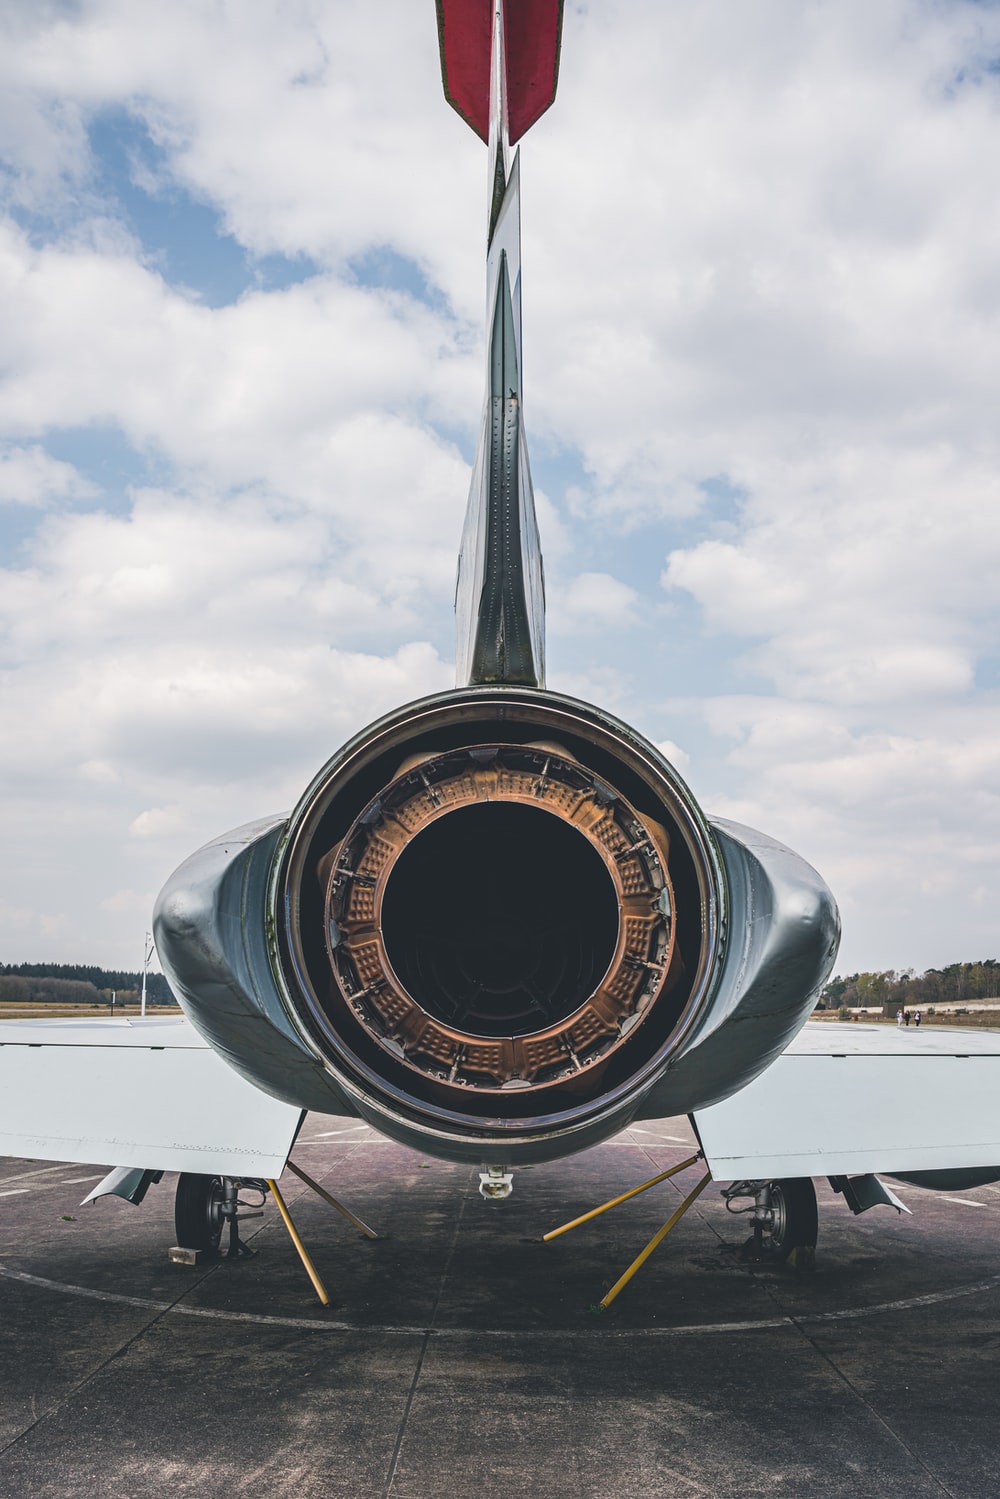 Jet Engine Picture. Download Free Image